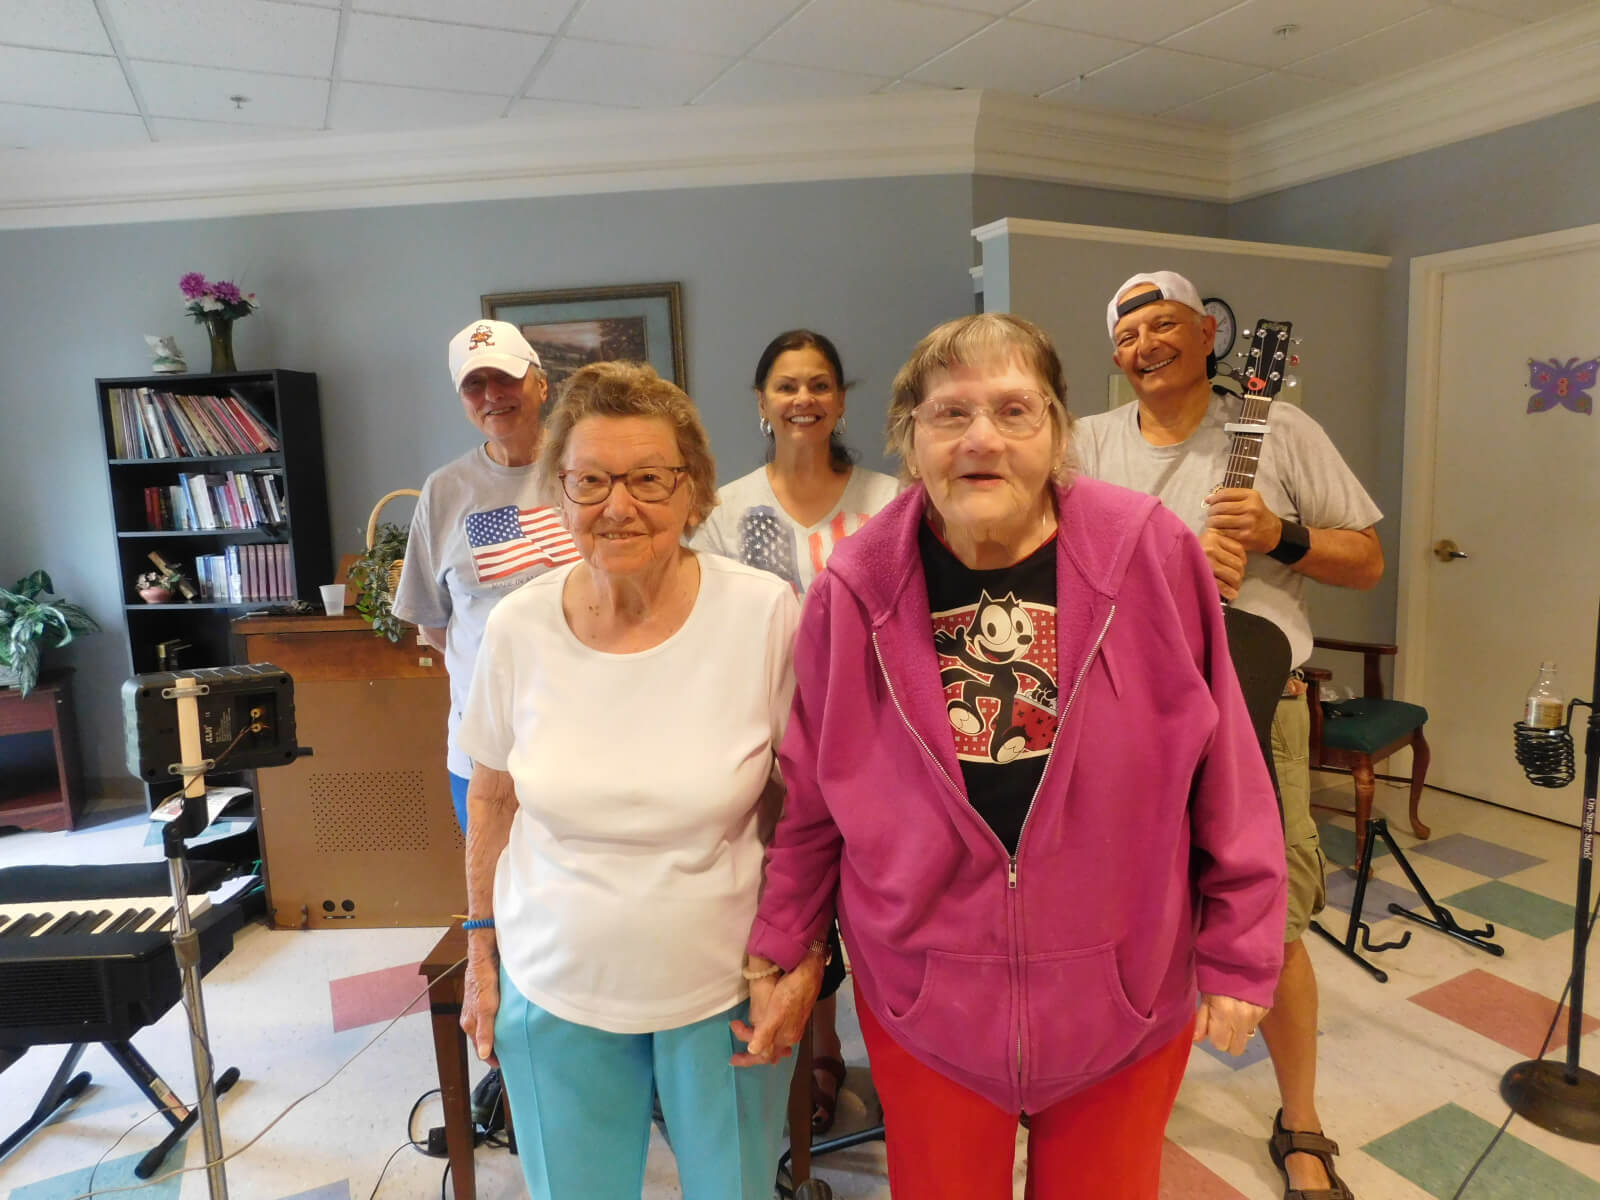 Westwood Commons residents Mary Light and Barbara Sabatini with Sorbello, Furiso and DelVecchio of Just Us!